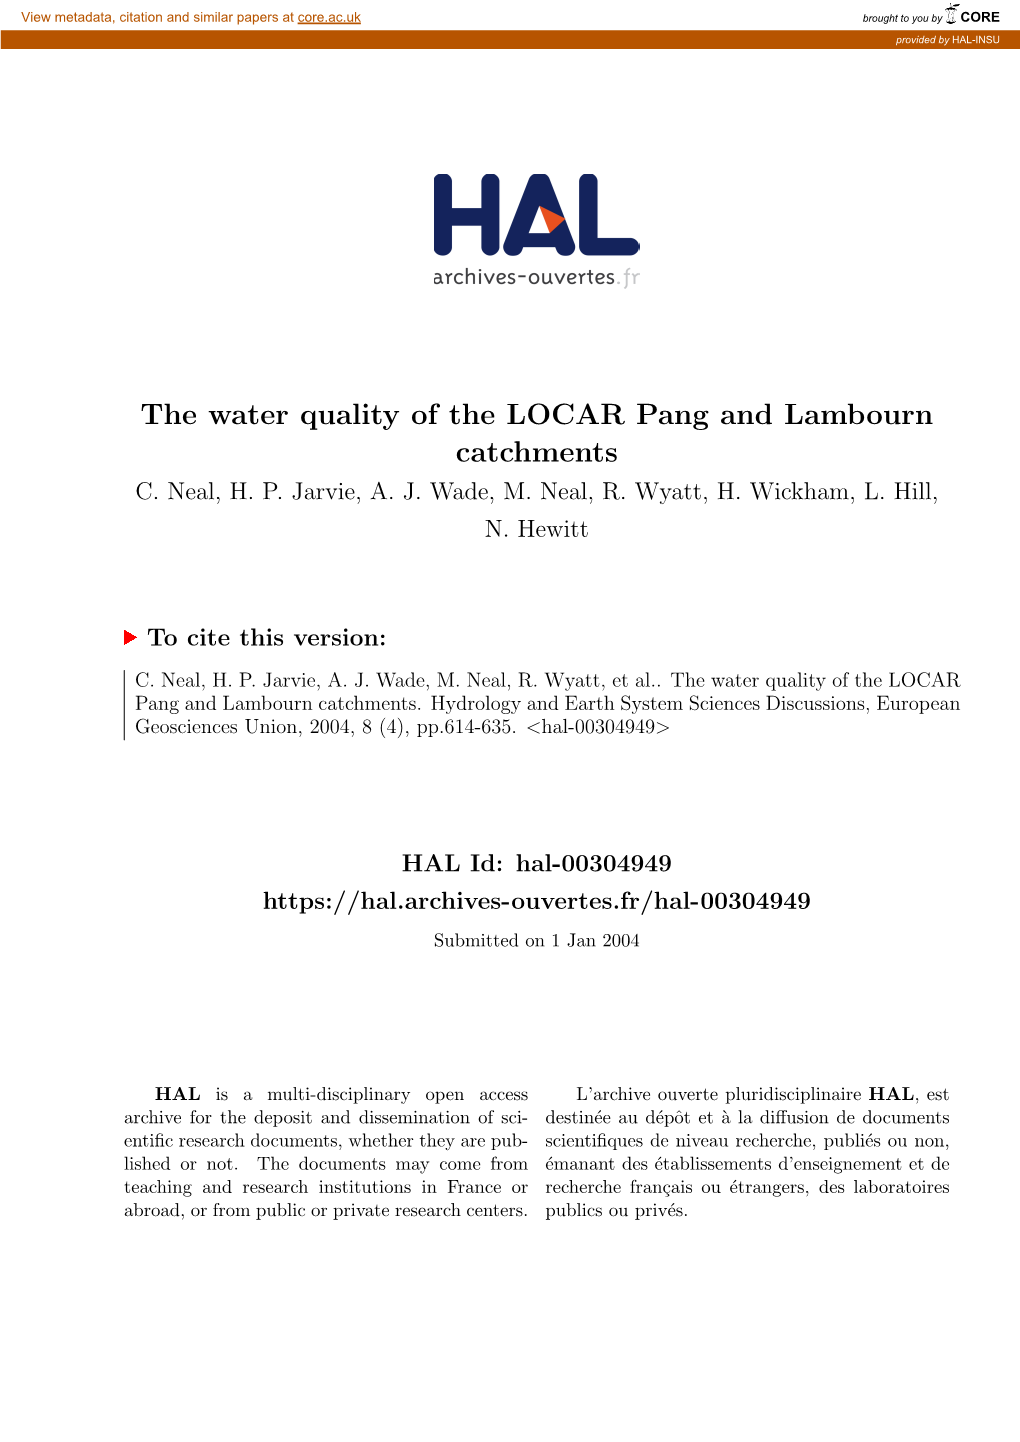 The Water Quality of the LOCAR Pang and Lambourn Catchments C